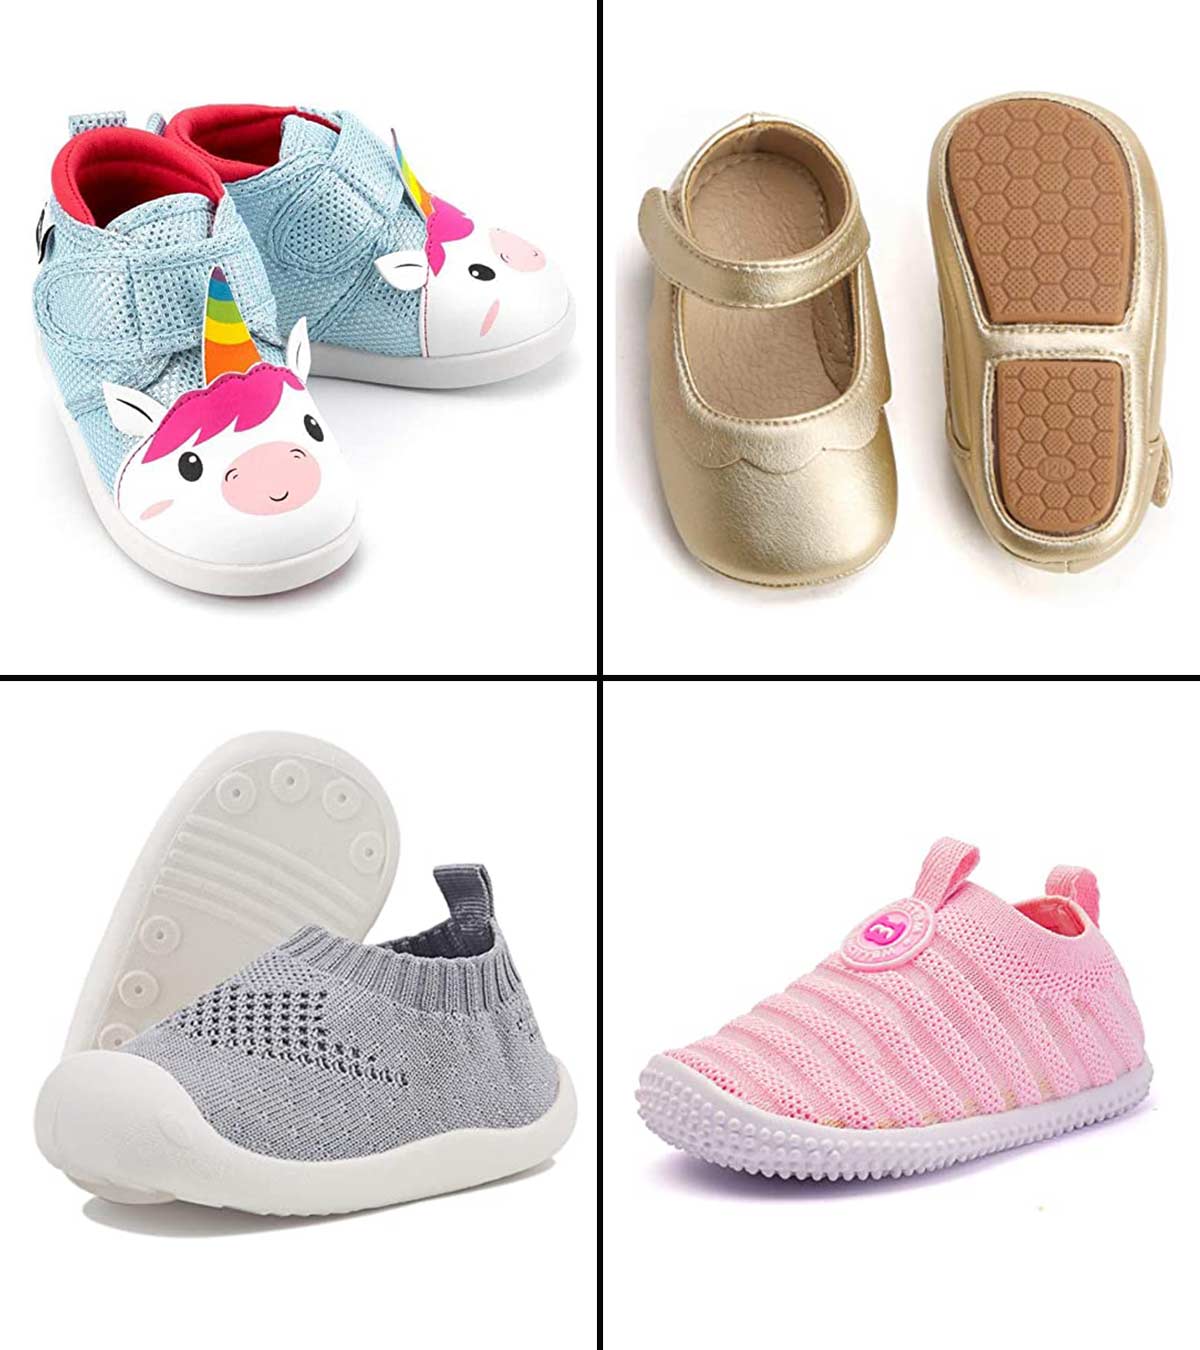 Best Baby Shoes for New Walkers: Ensuring Safety and Stability